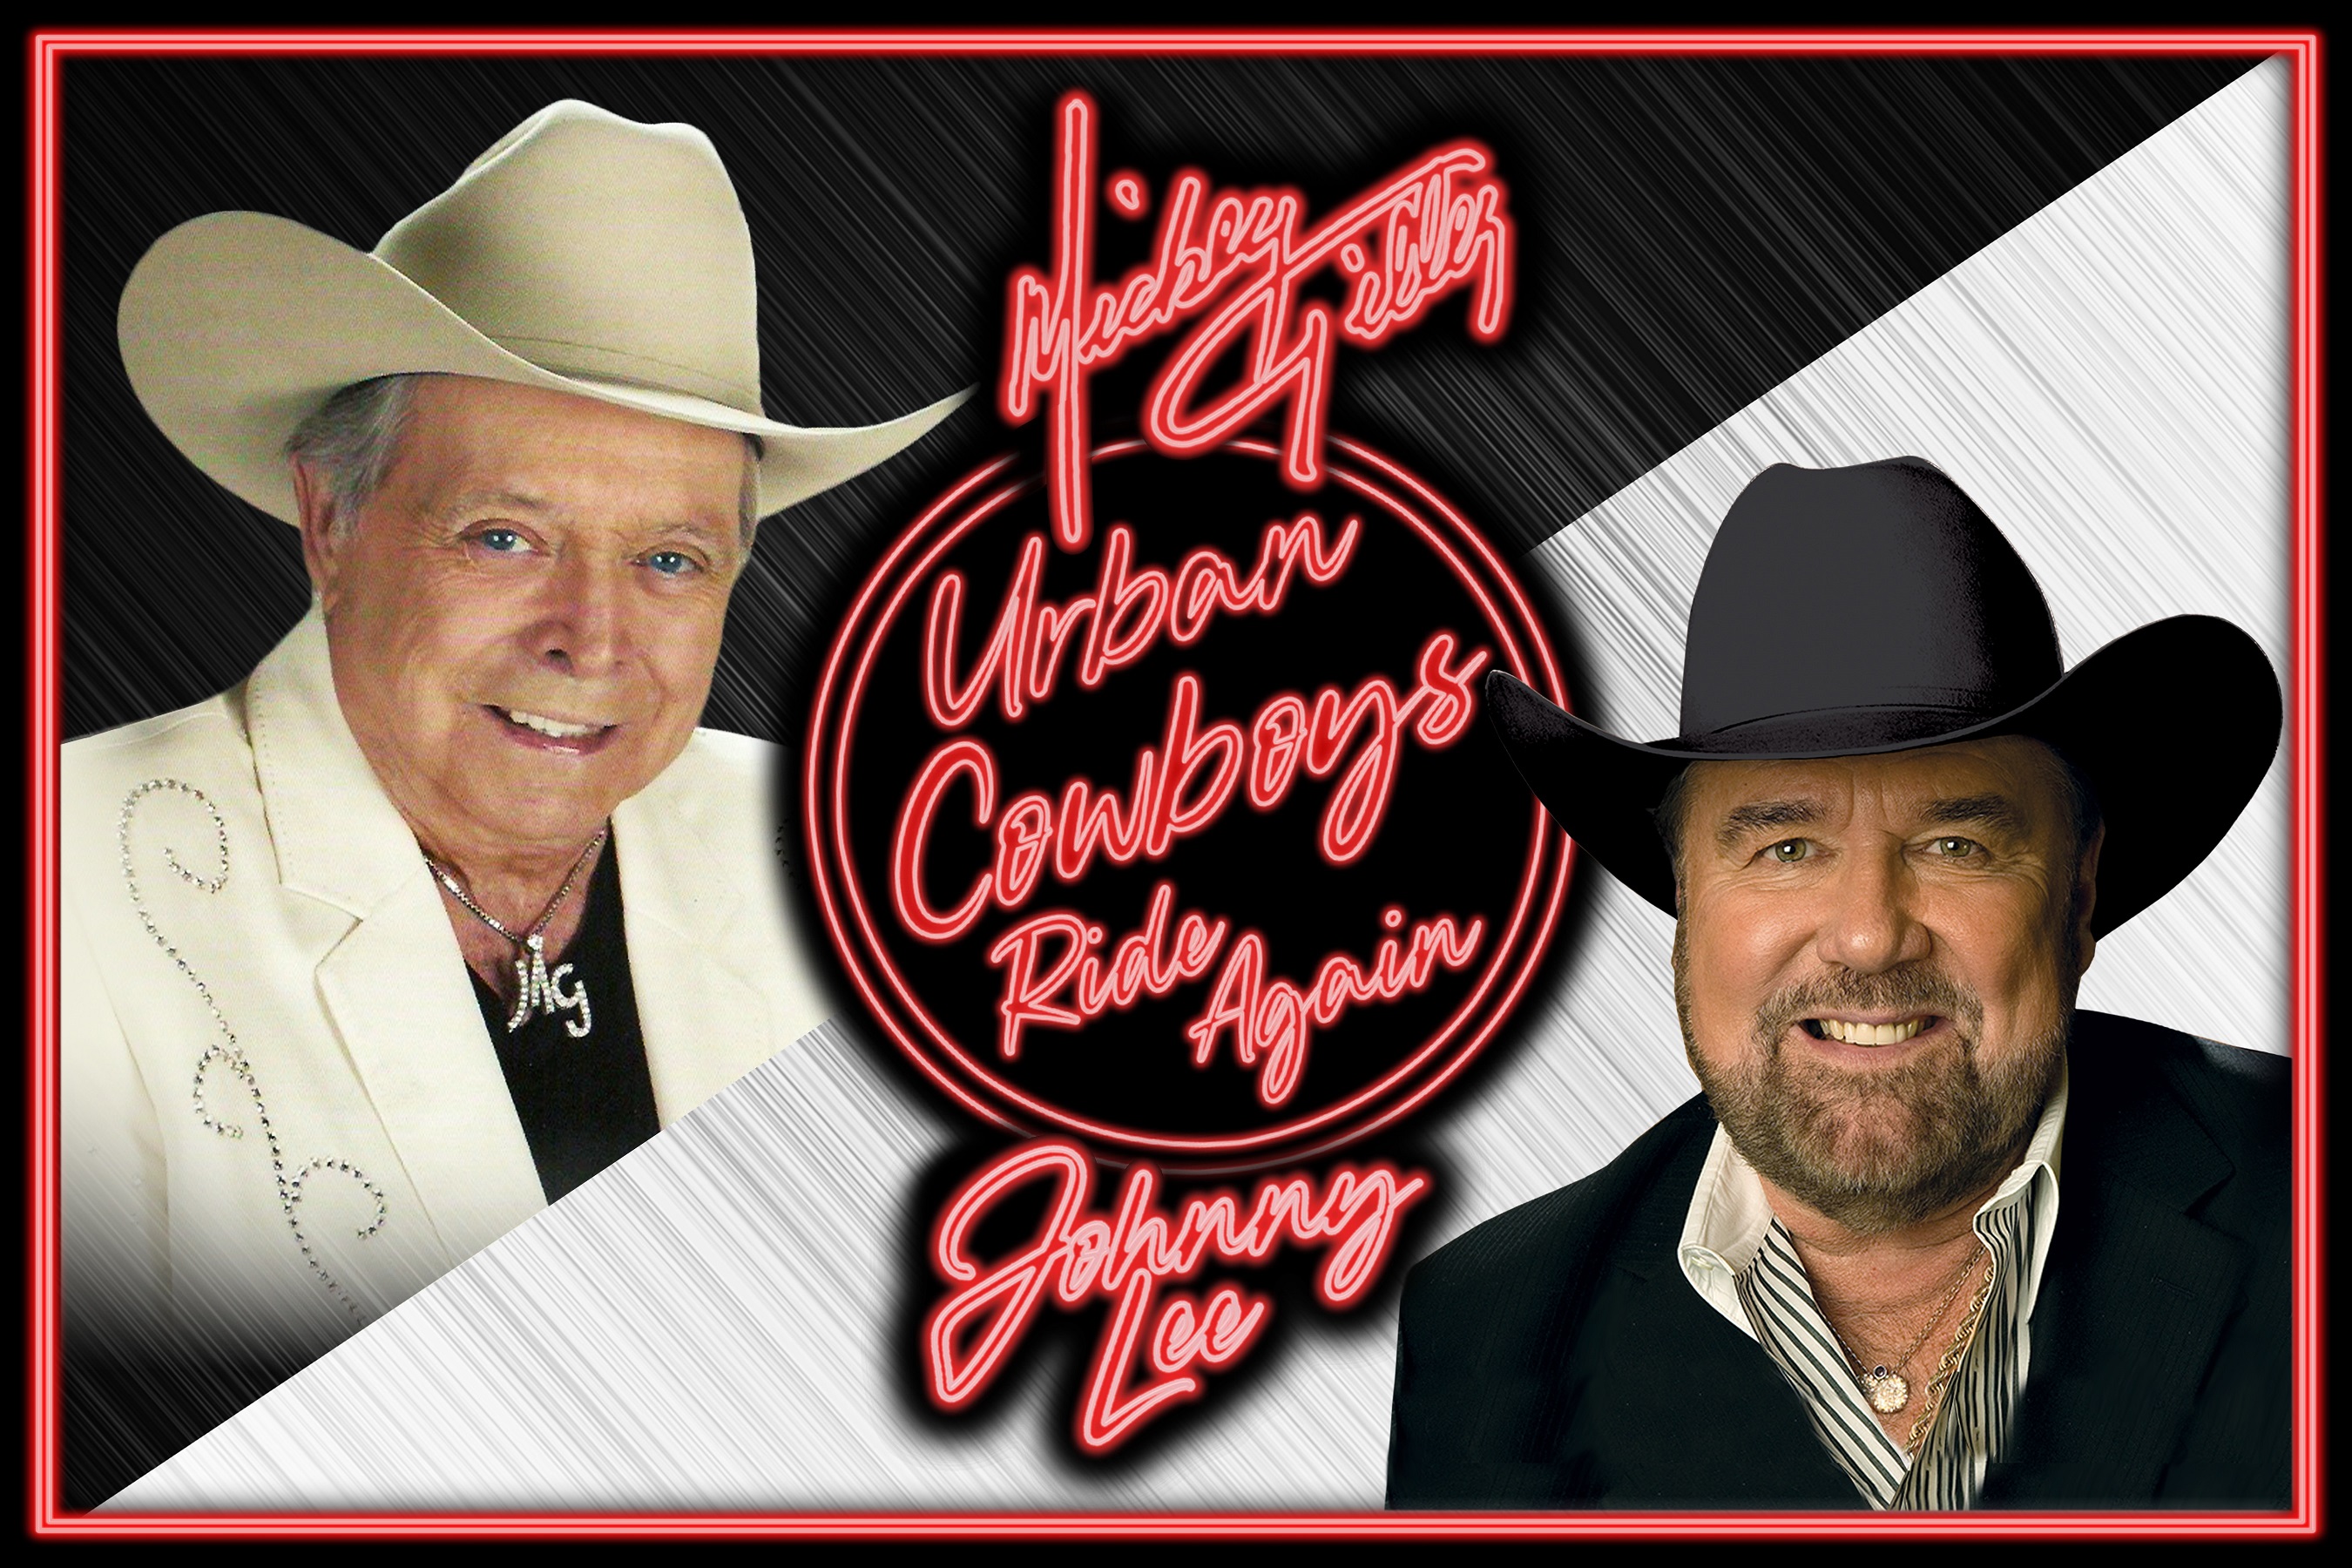 Mickey Gilley & Johnny Lee Urban Cowboy Reunion preview image